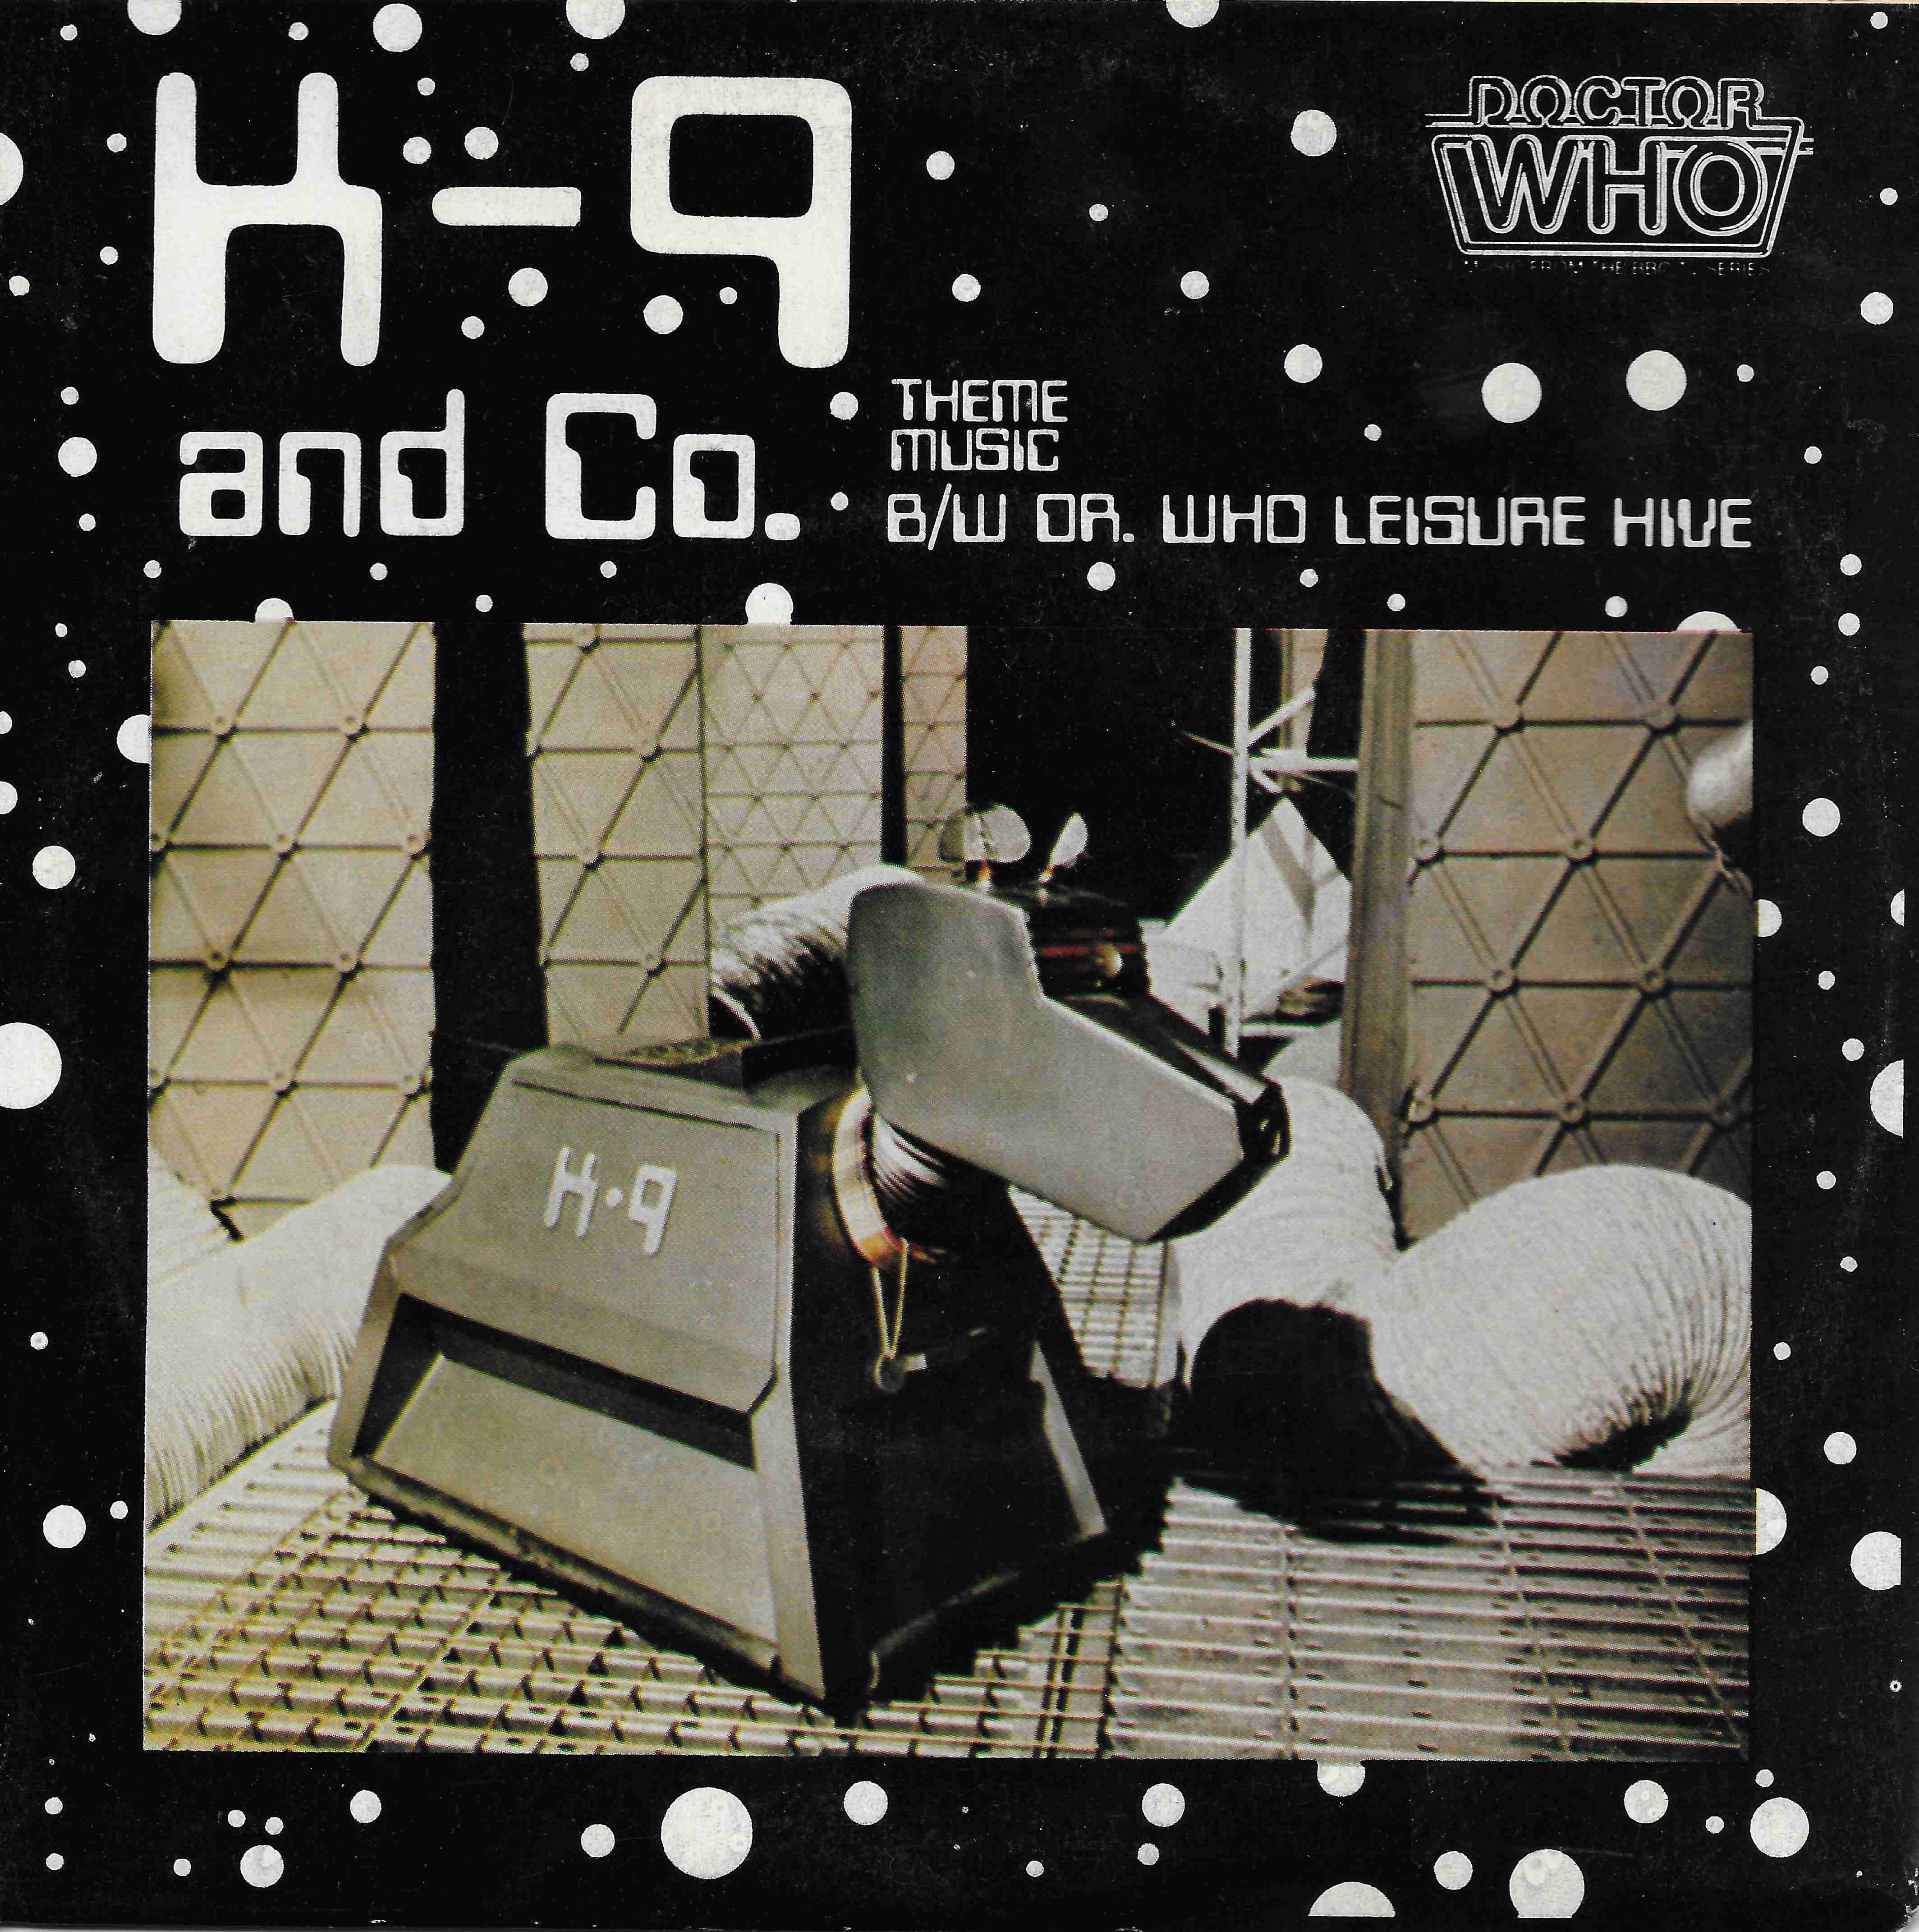 Picture of BBC - 456 K-9 and Co. by artist Flachra Trench / Ian Levine from the BBC singles - Records and Tapes library